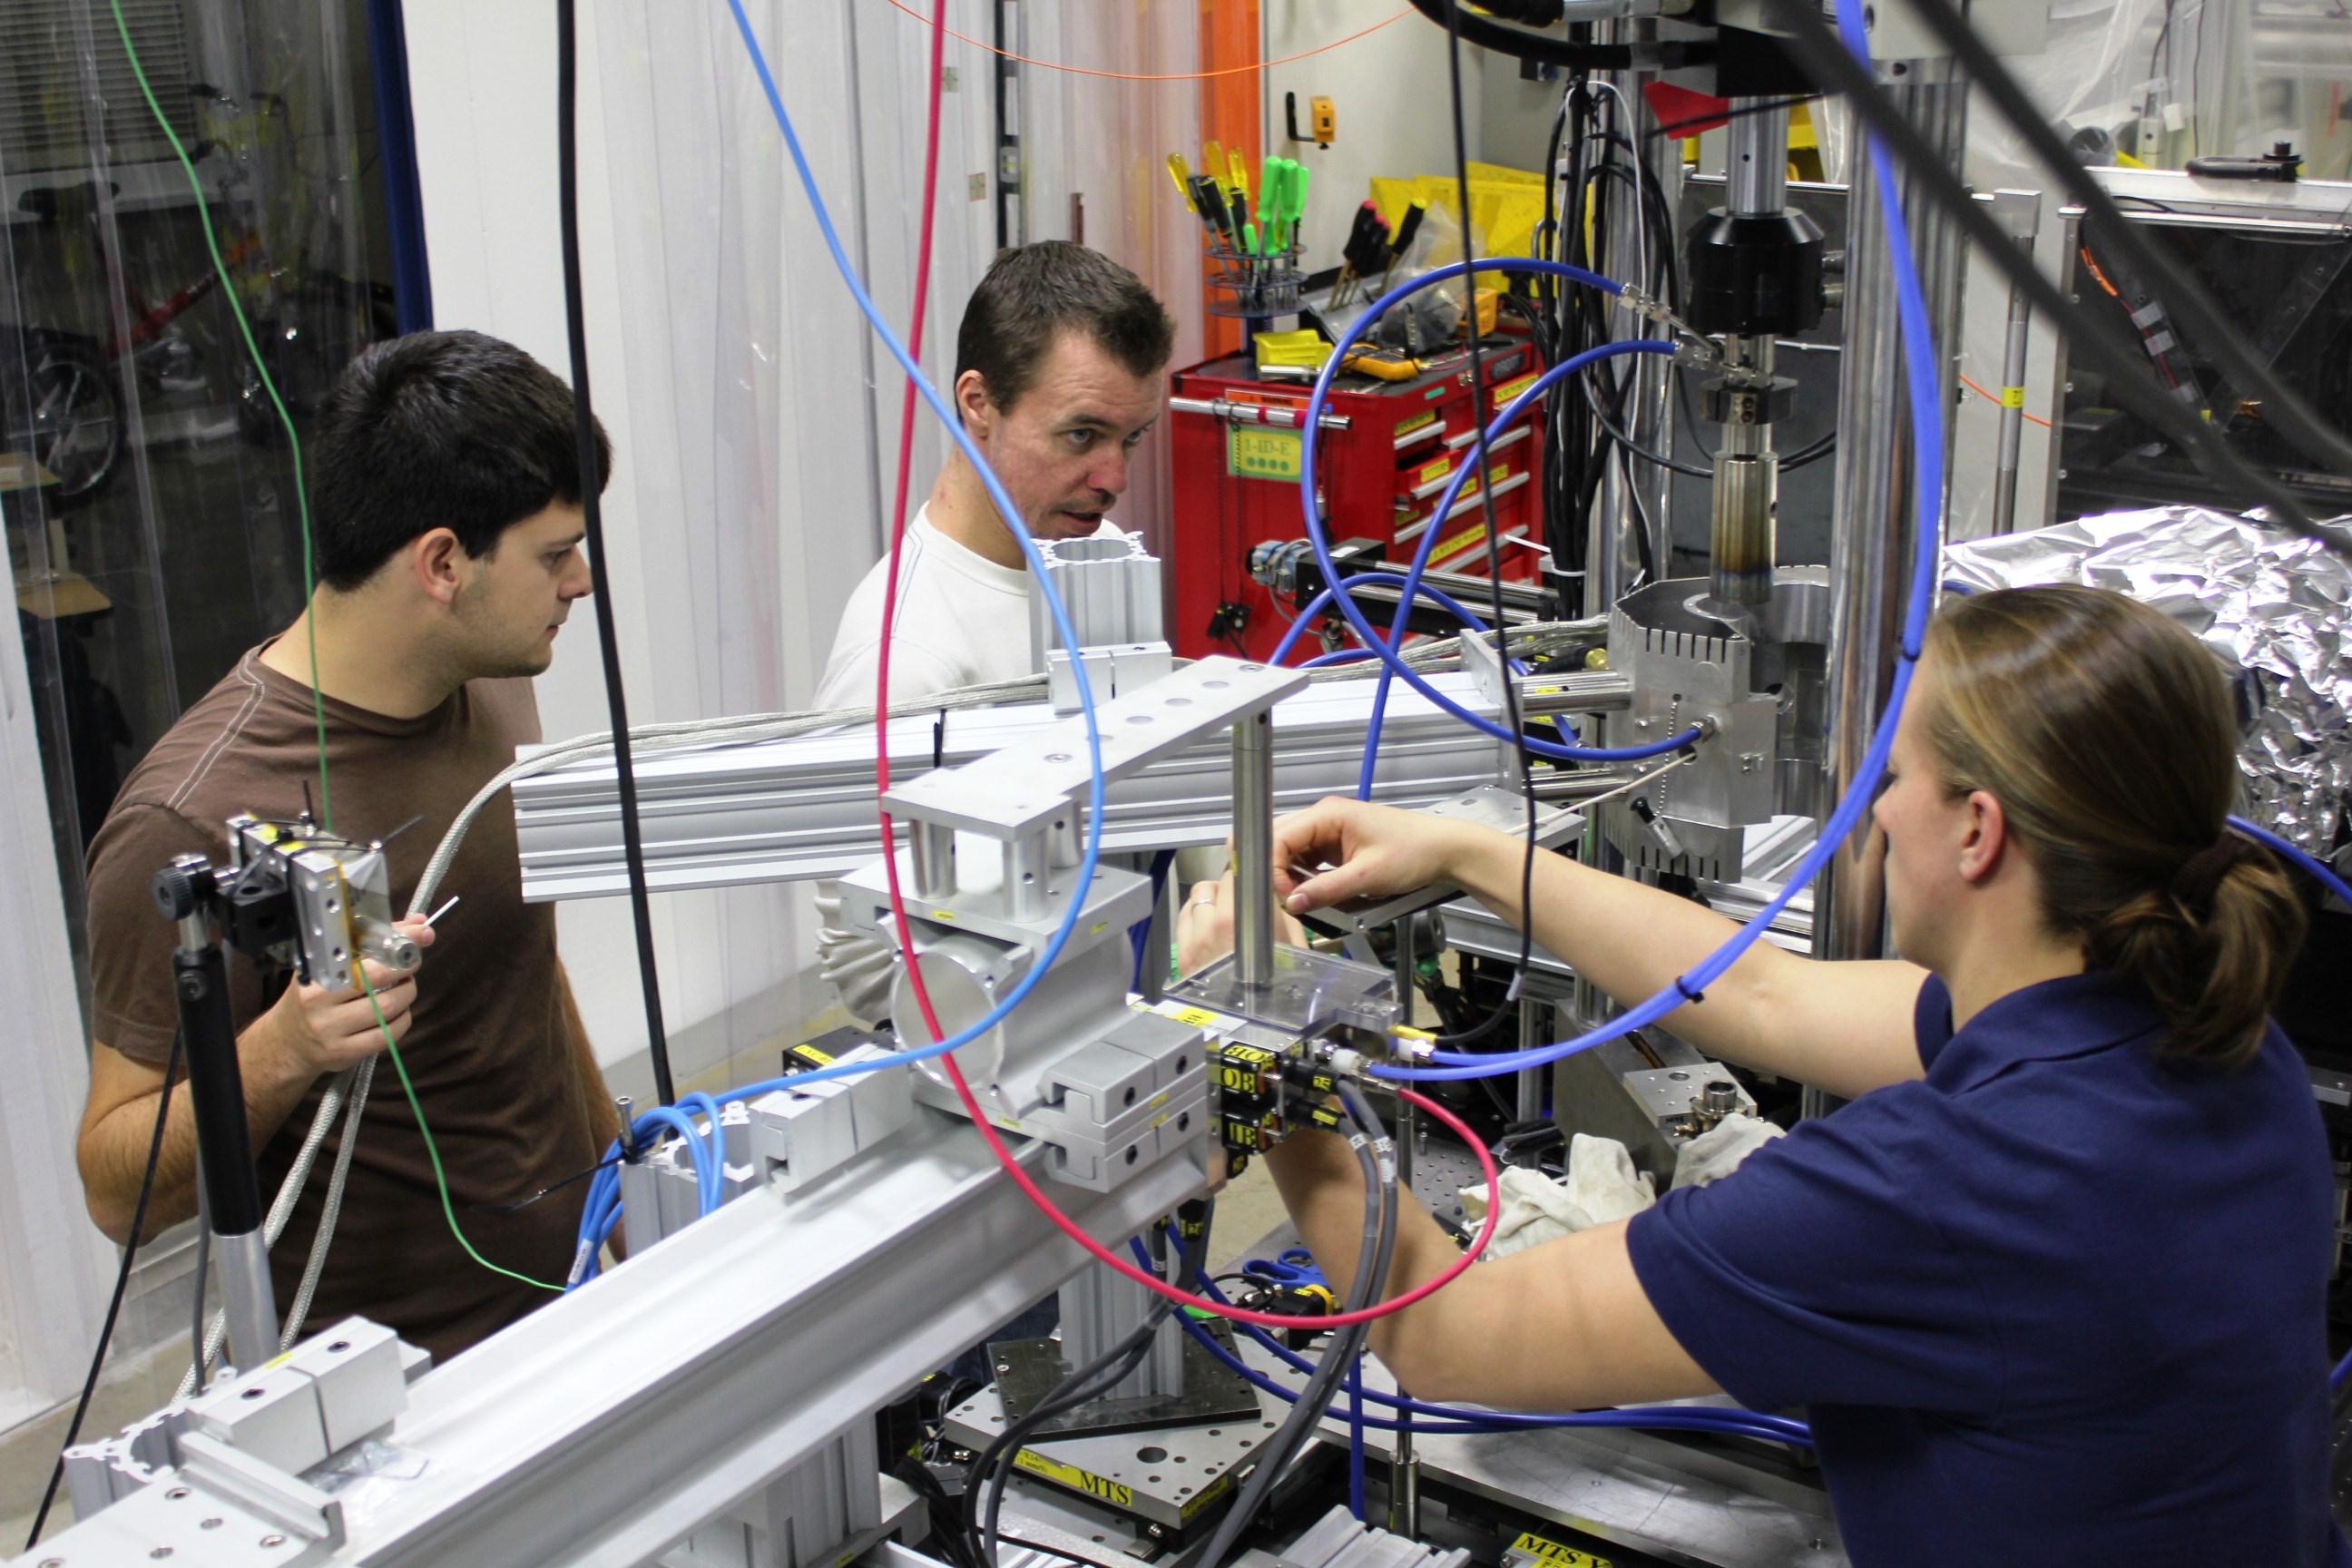 (From left) University of Central Florida Ph.D. students Albert Manero and Kevin Knipe work with Janine Wischek, head of the Mechanical Testing of Materials Group from the German Aerospace Center, to integrate the unique experimental X-ray setup at the Advanced Photon Source at Argonne National Lab.